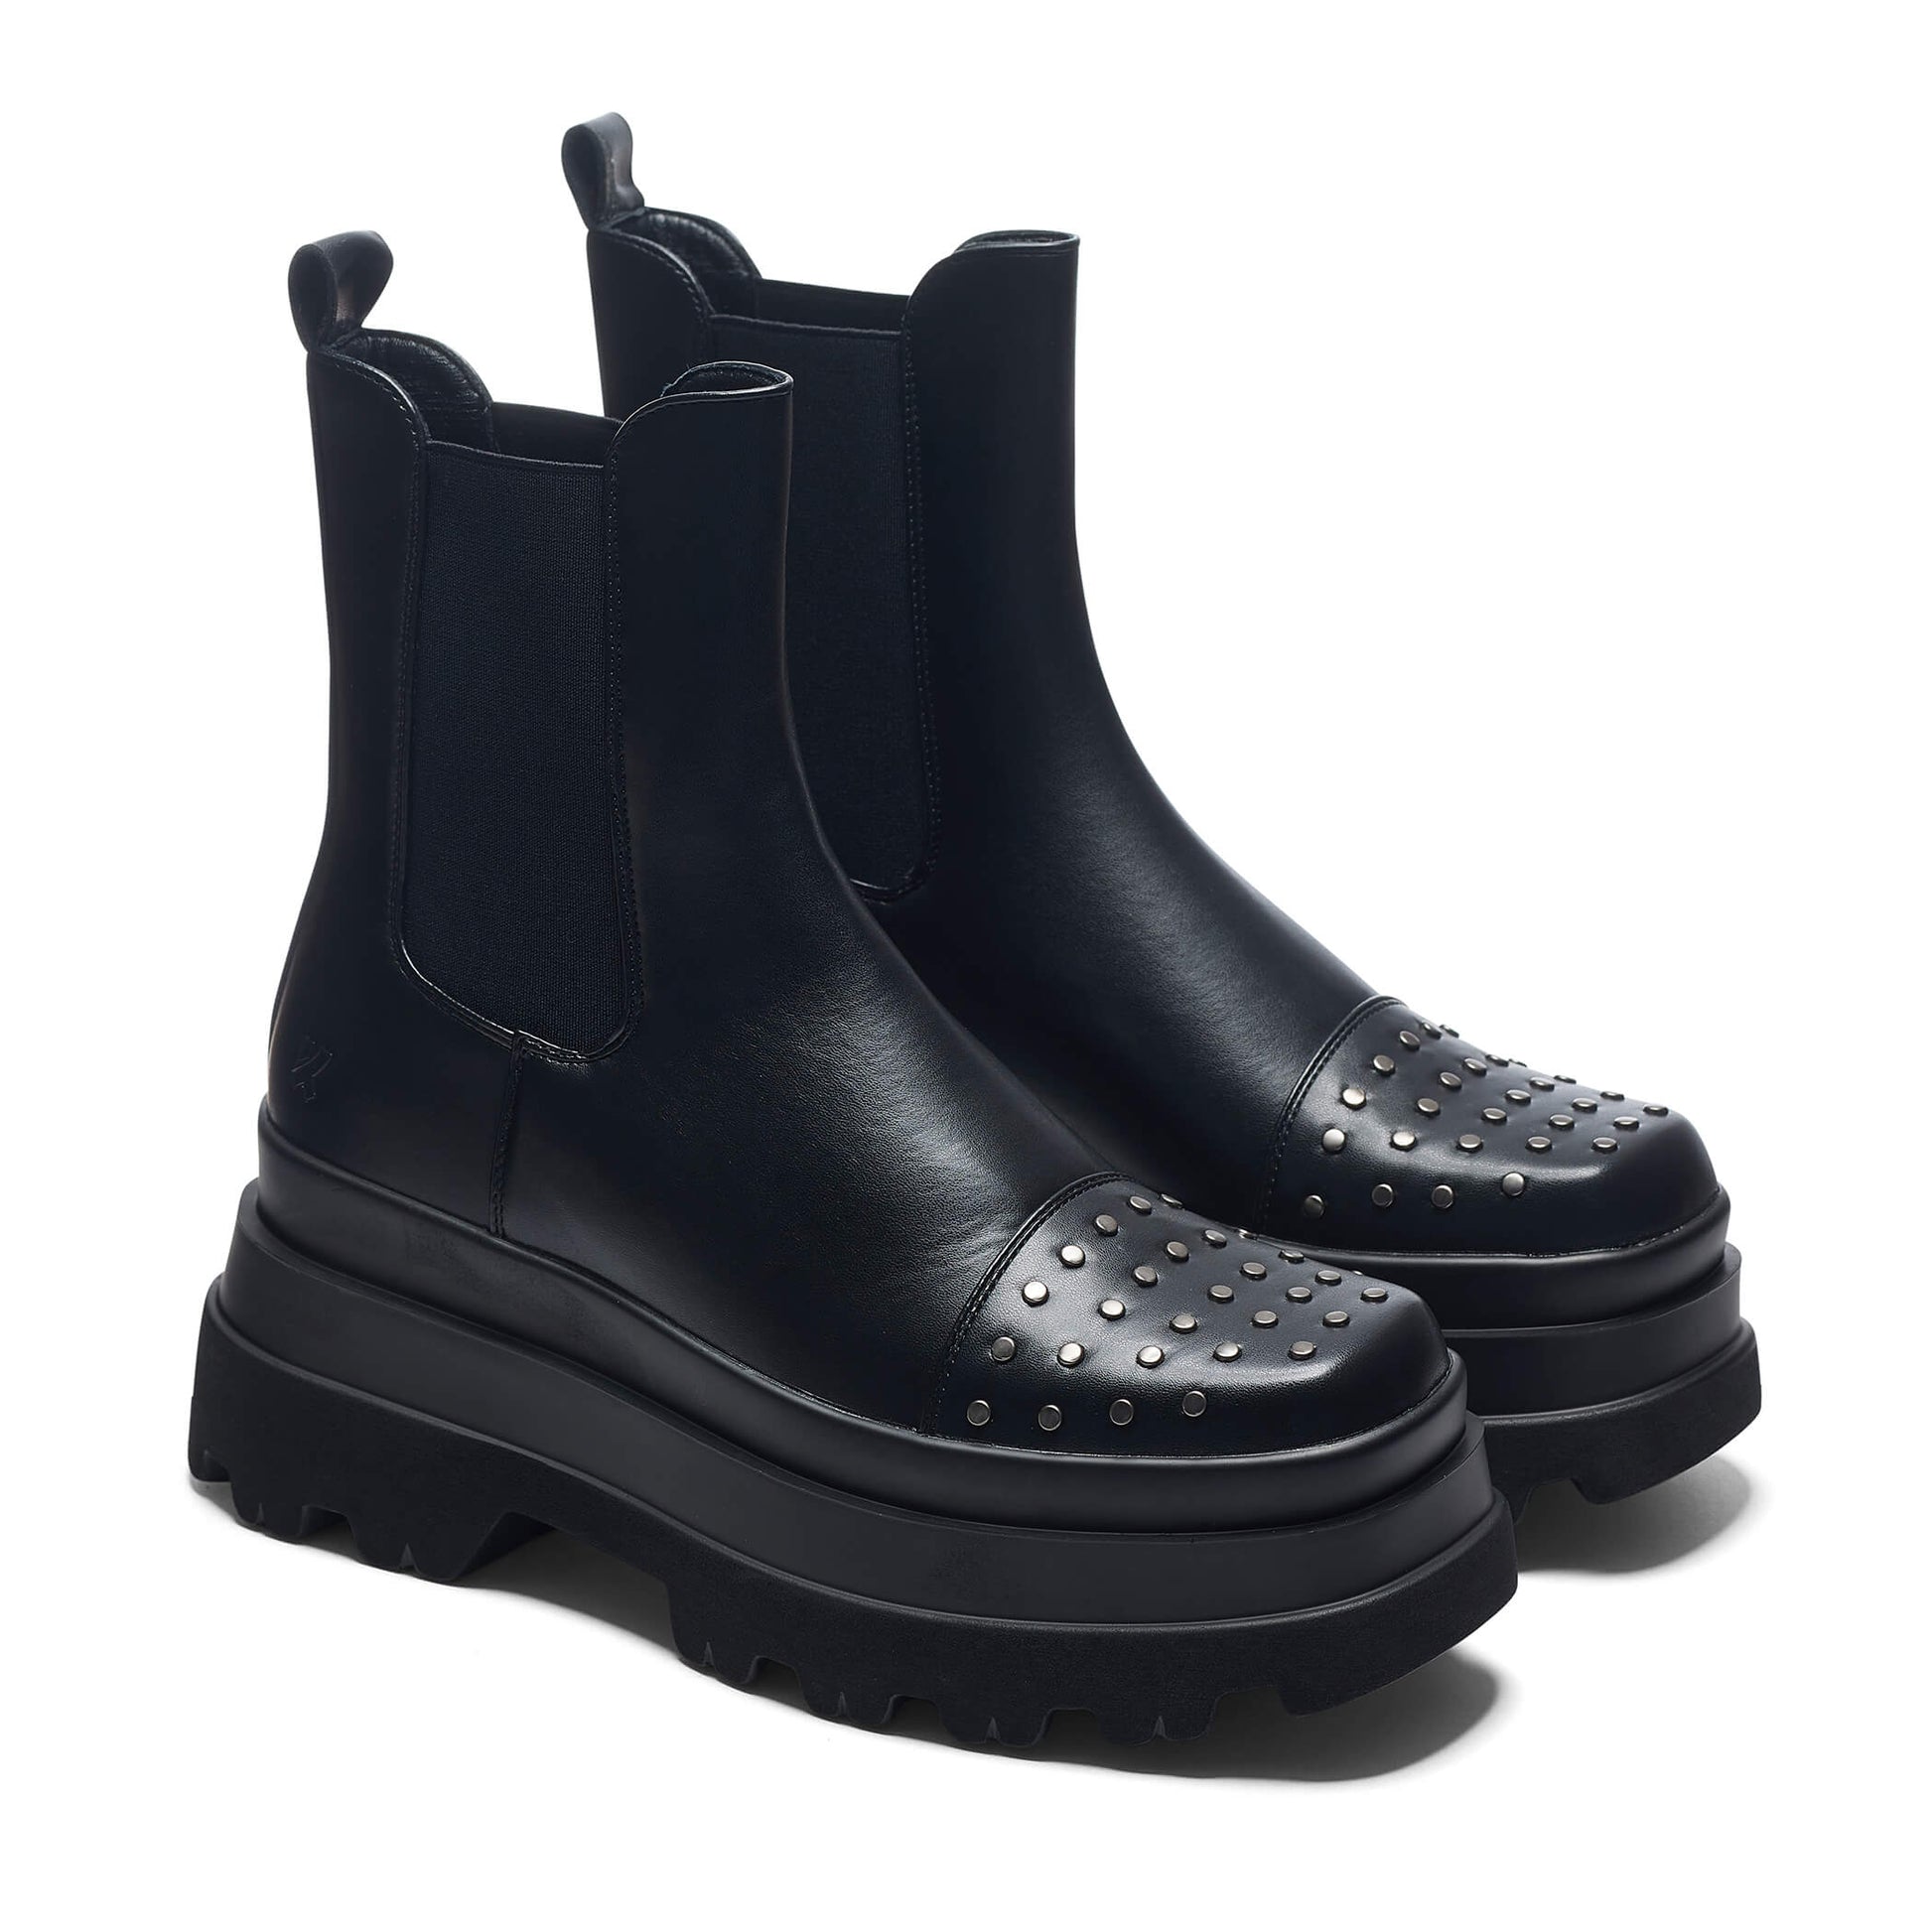 Silence Studded Trident Chelsea Boots - Black - Ankle Boots - KOI Footwear - Black - Three-Quarter View